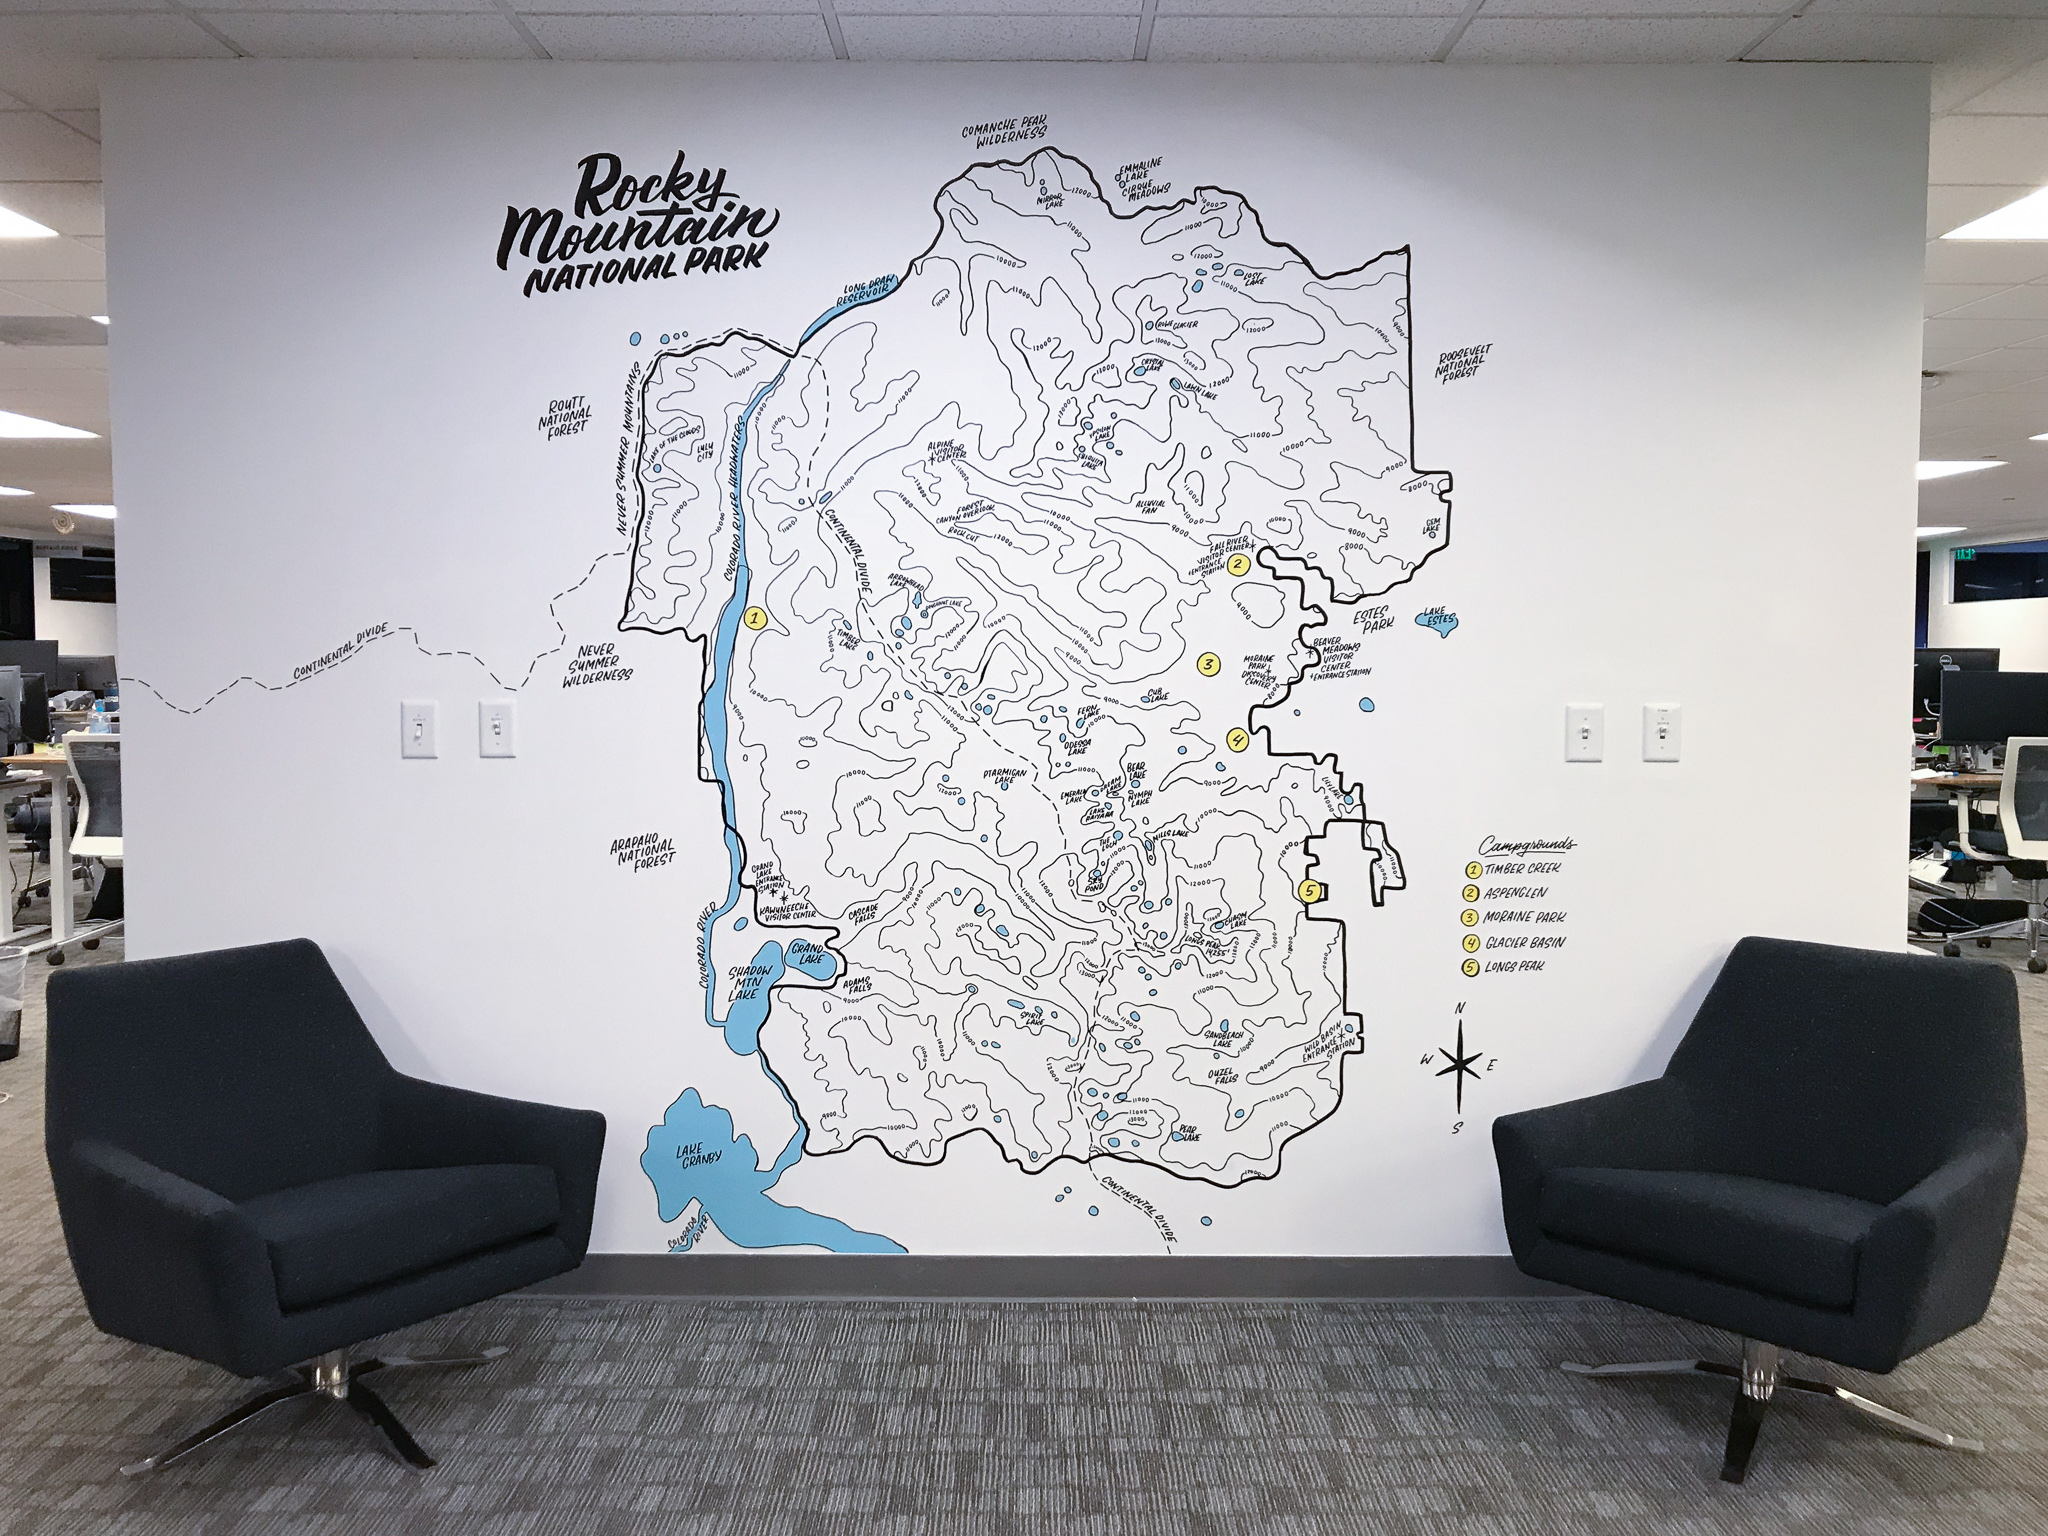 Gusto Denver Colorado Rocky Mountain National Park topographic map map mural by Hillery Powers